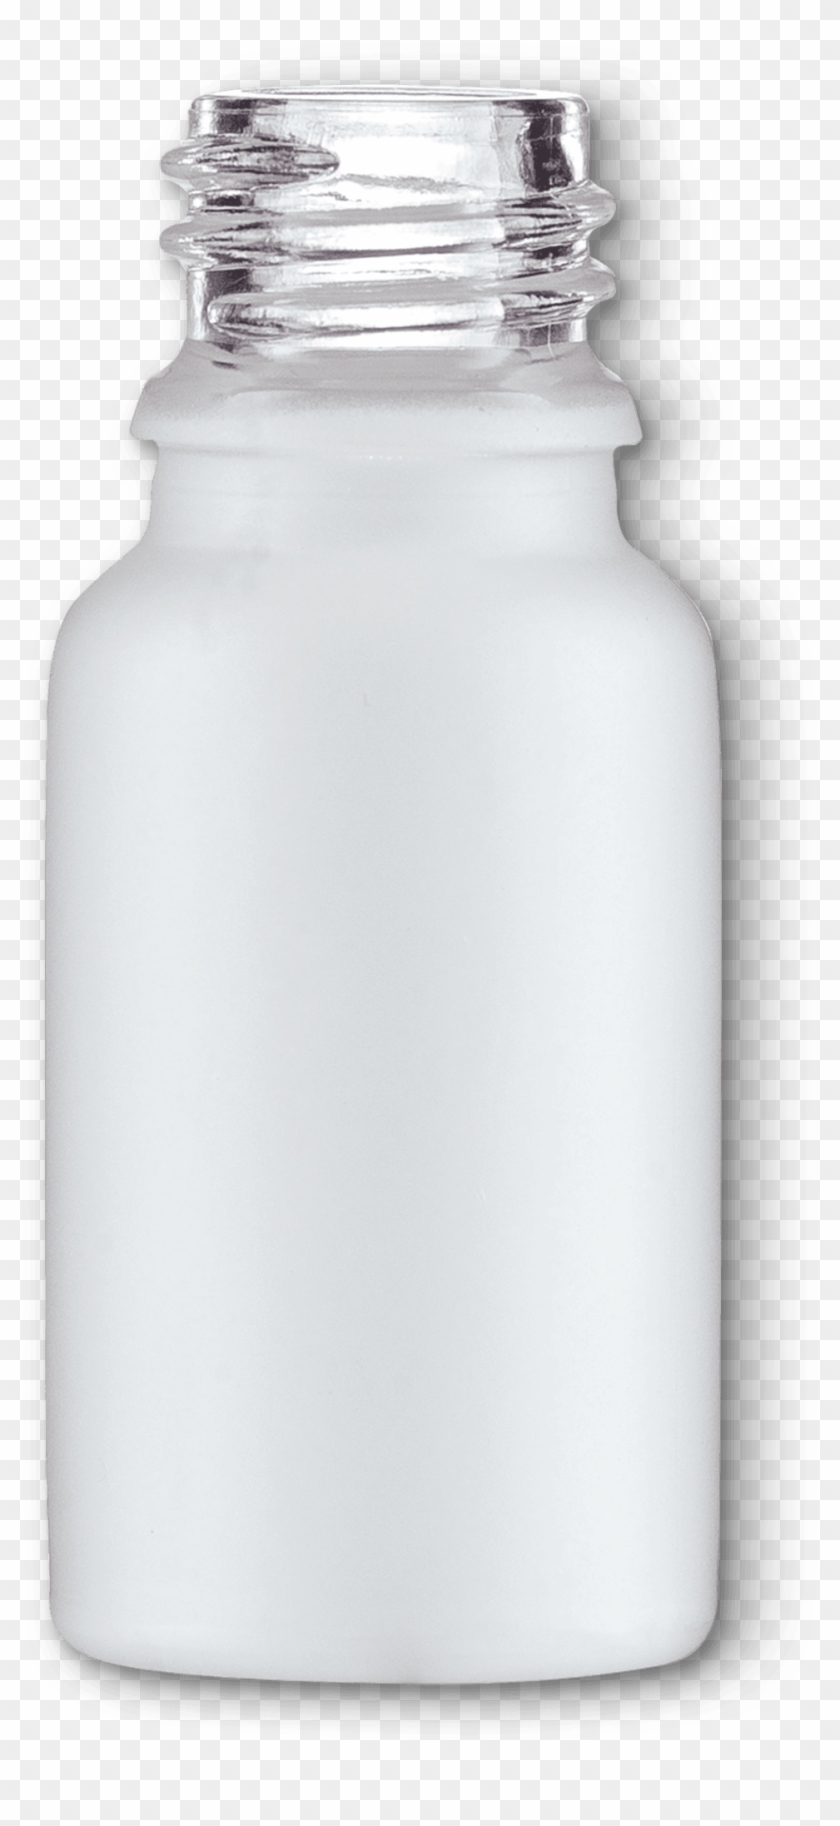 Our - Glass Bottle Clipart #3750651